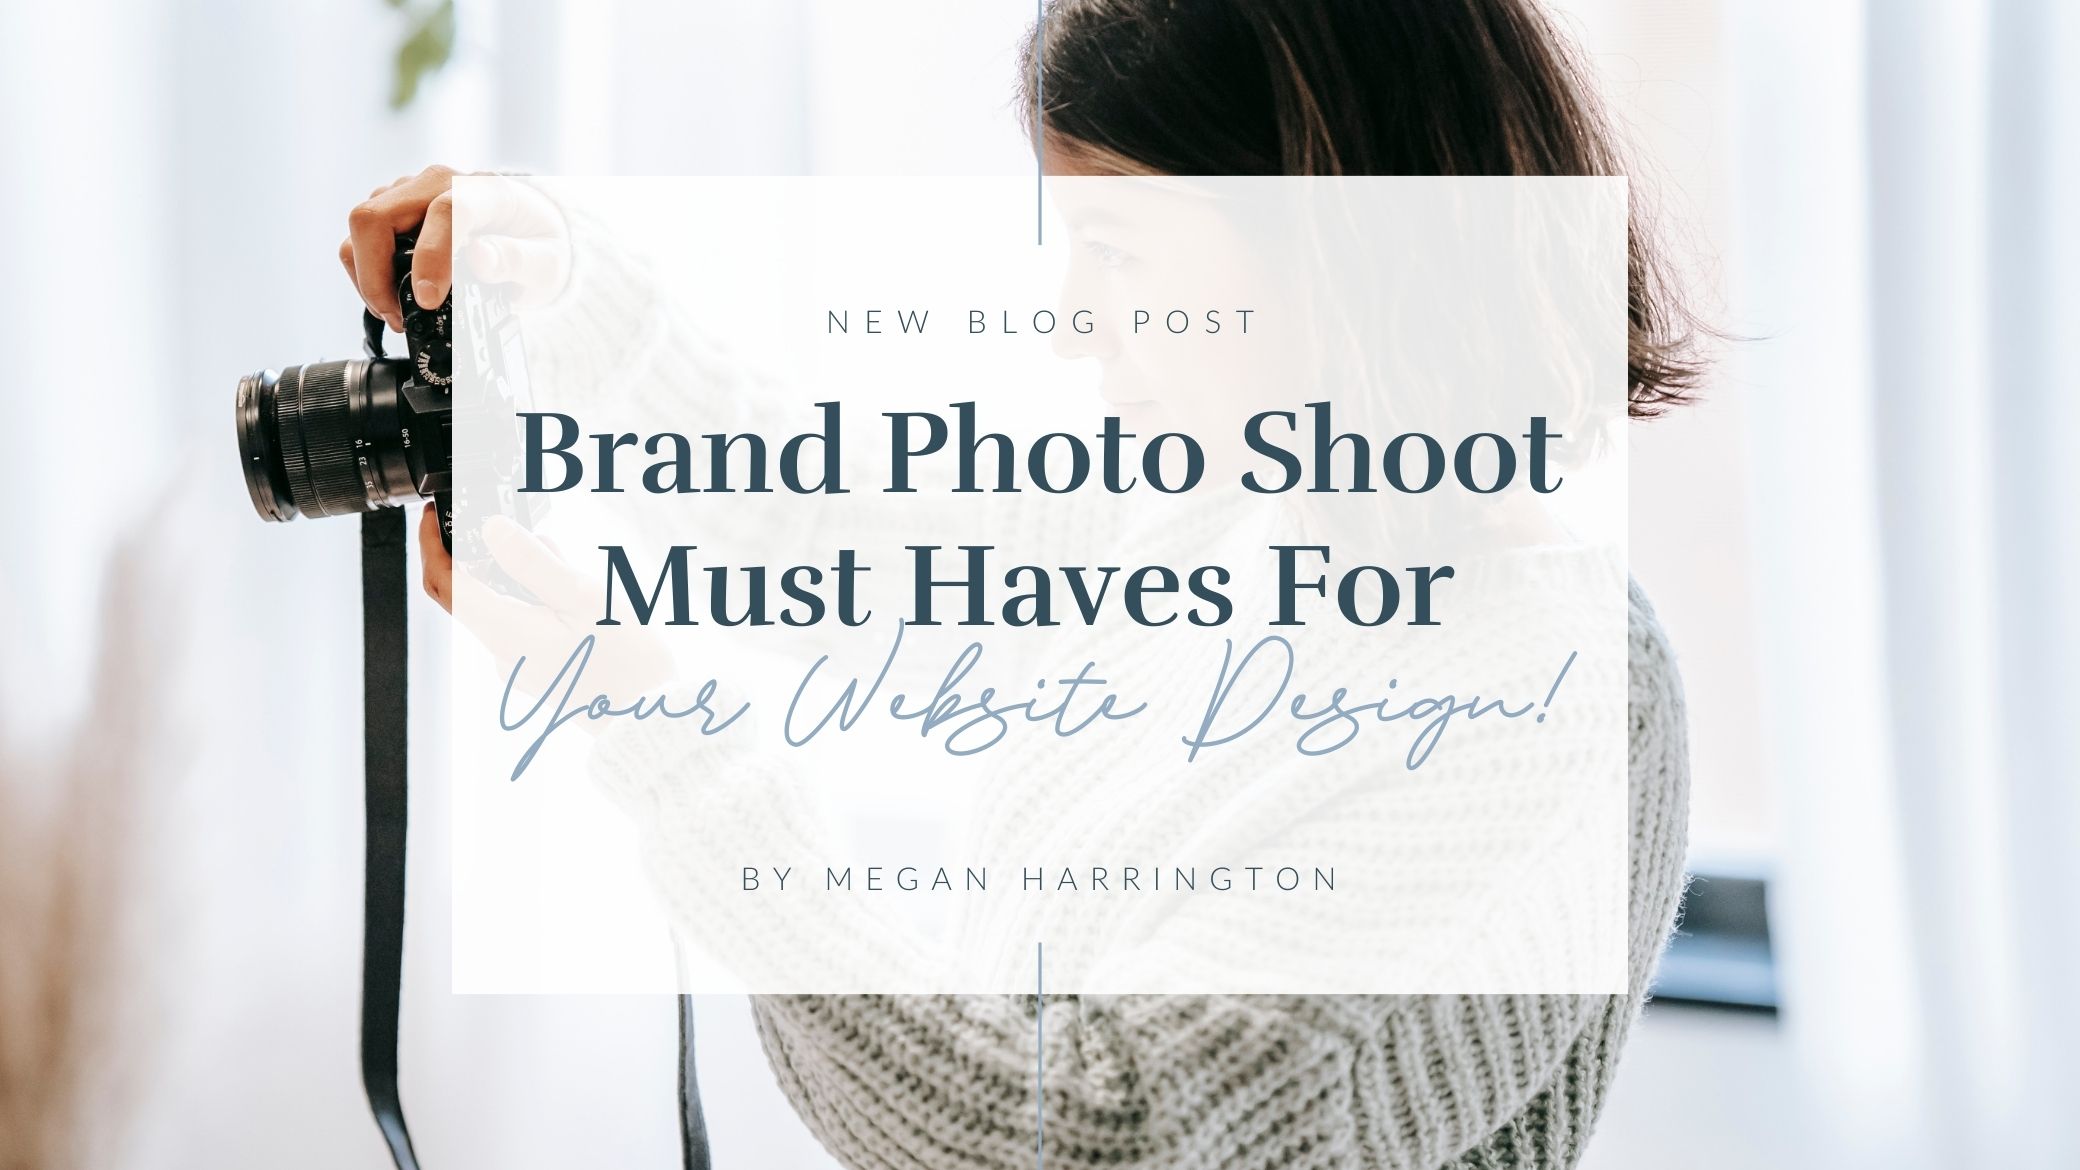 Brand Photo Shoot Must Haves For Your Website Design